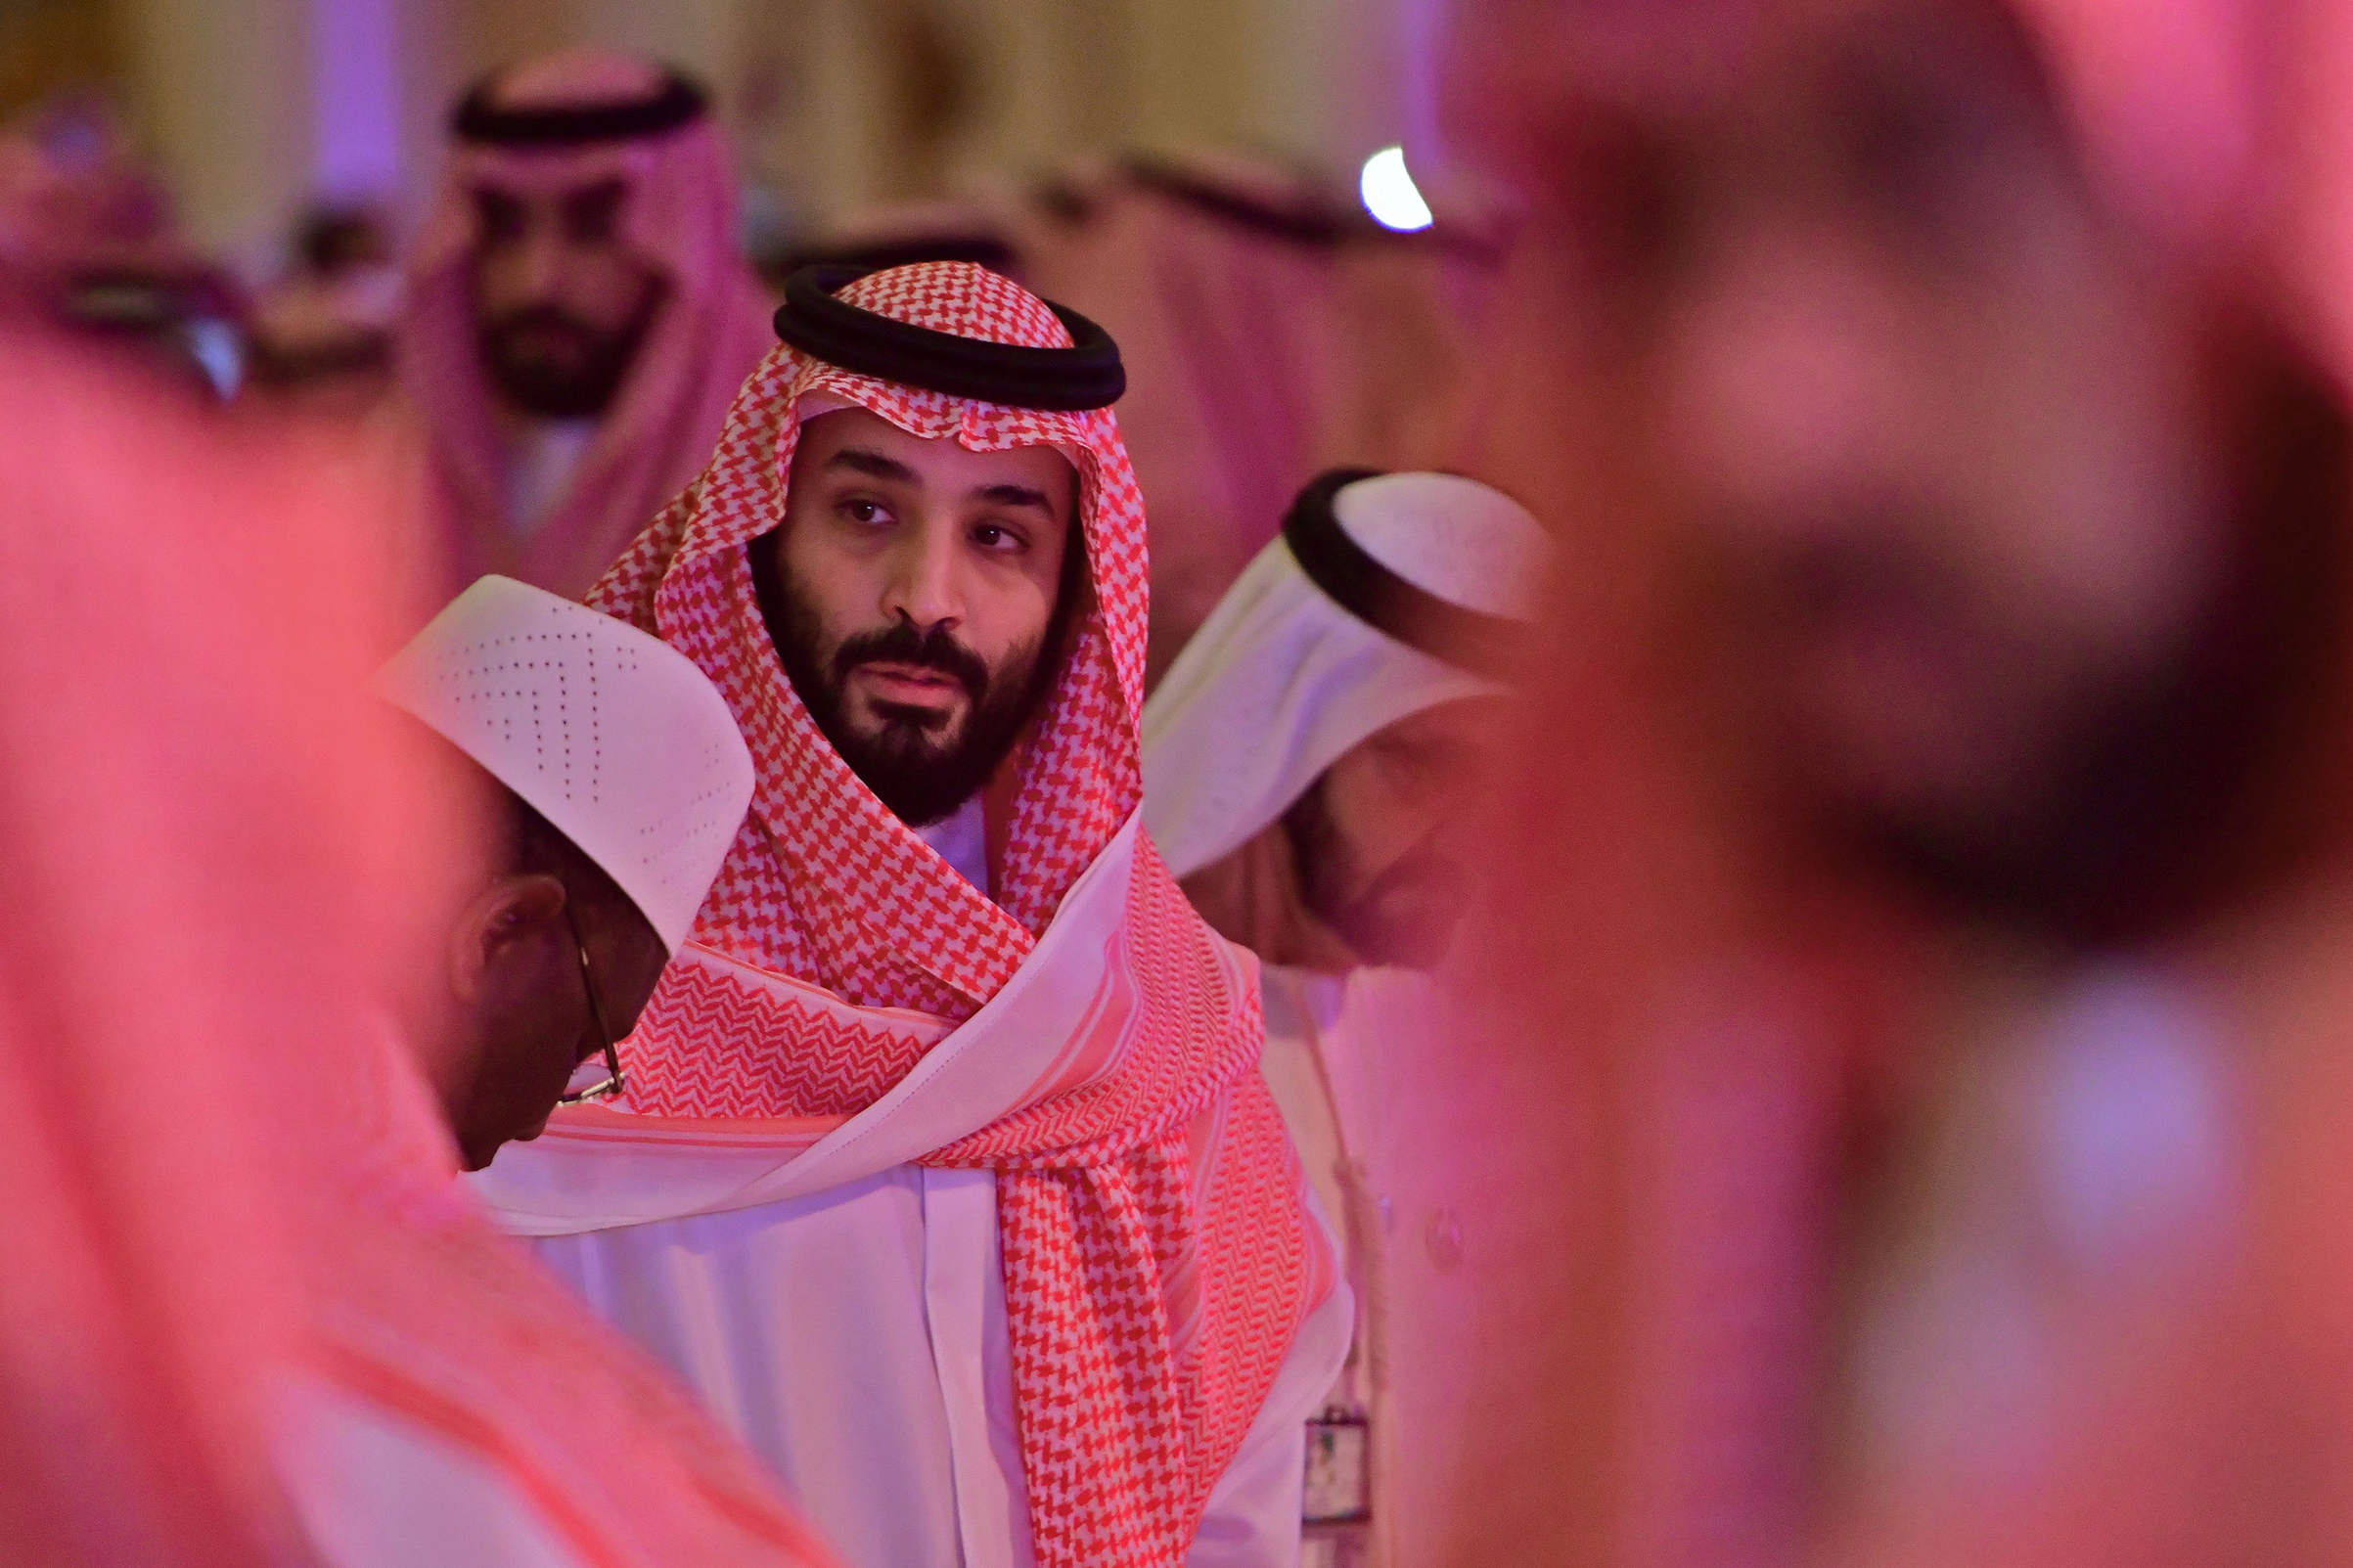 Saudi Crown Prince Mohammed bin Salman arrives at the Future Investment Initiative FII conference in the Saudi capital Riyadh on Oct. 24, 2018. (Giuseppe Cacace—AFP/Getty Images)